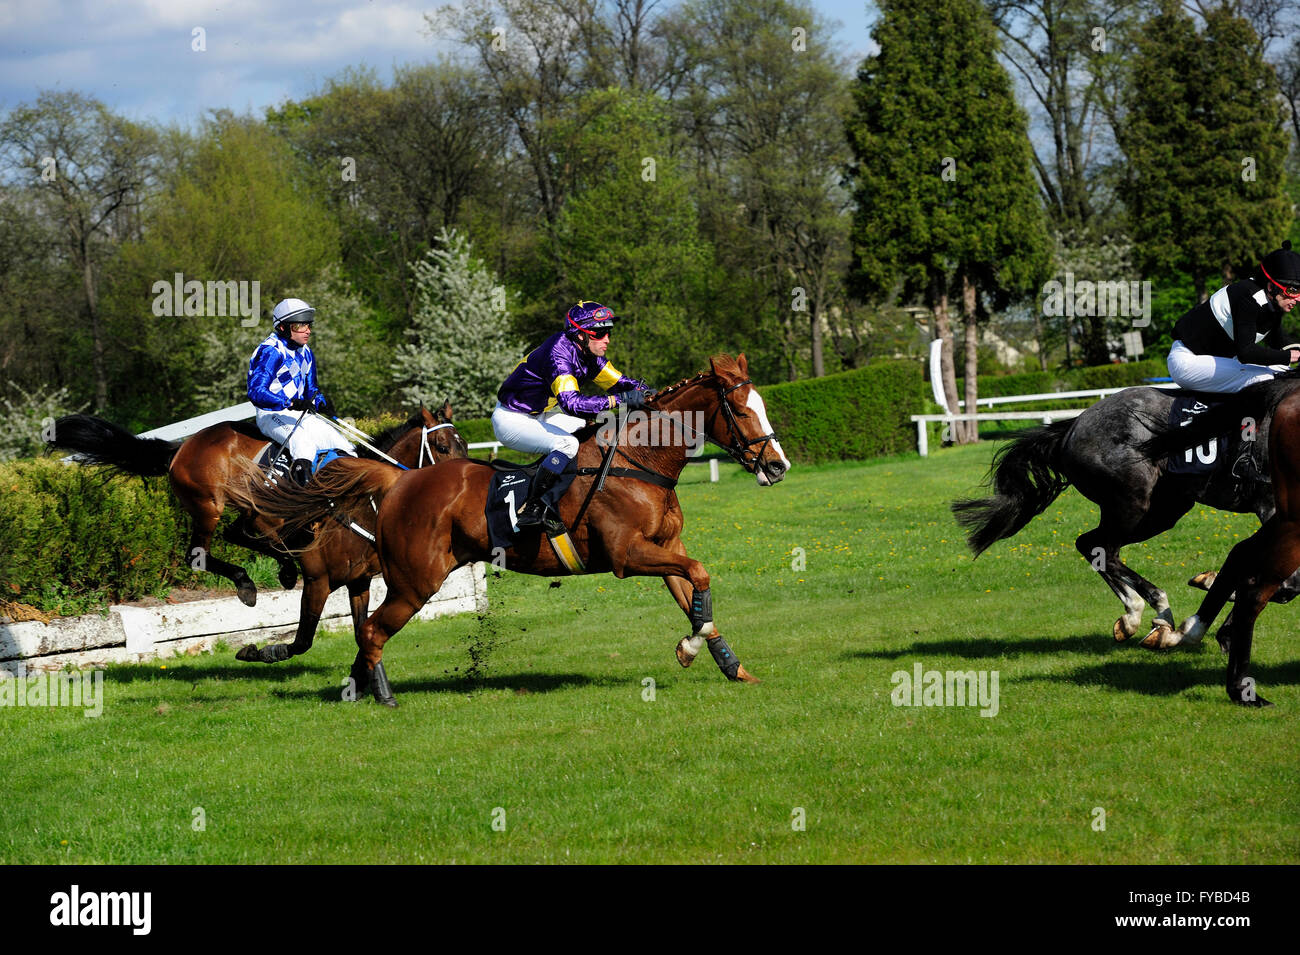 Racing, horse, Partynice Wroclaw, Poland, Open Season 2016, 24 april 2016, wroclaw, dolnoslaskie, partynice, poland, europe,Poland. 24th April, 2016. Racing, horse, Partynice Wroclaw, Poland, Open Season 2016, wroclaw, dolnoslaskie, partynice, poland, europe, 24 april 2016, © Kazimierz Jurewicz/Alamy Live News Stock Photo